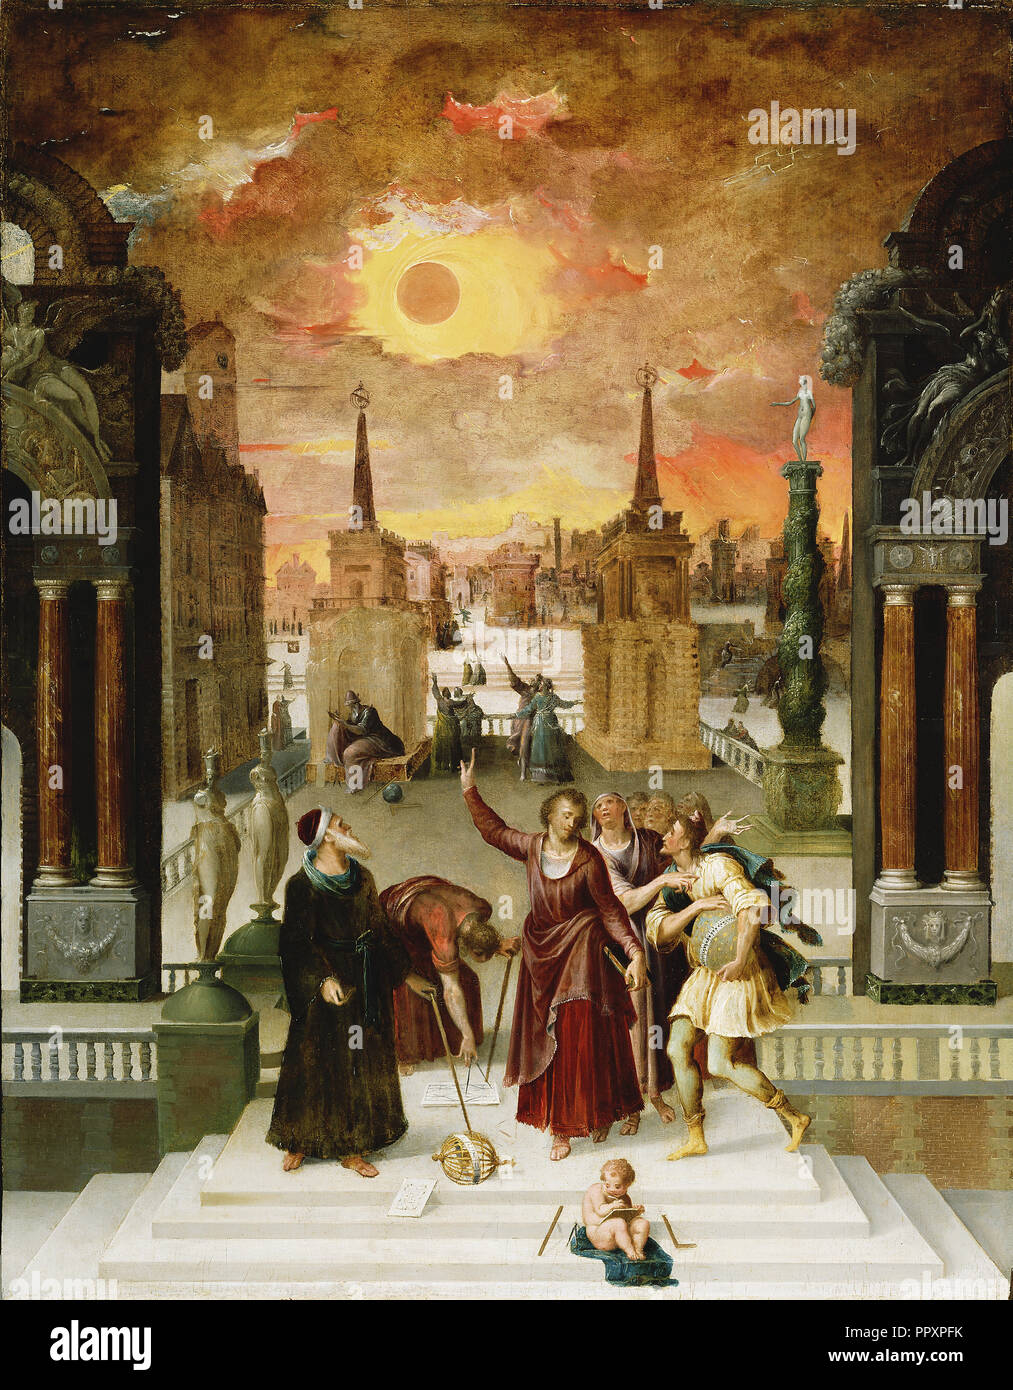 Dionysius the Areopagite Converting the Pagan Philosophers; Antoine Caron, French, 1521 - 1599, 1570s; Oil on panel Stock Photo